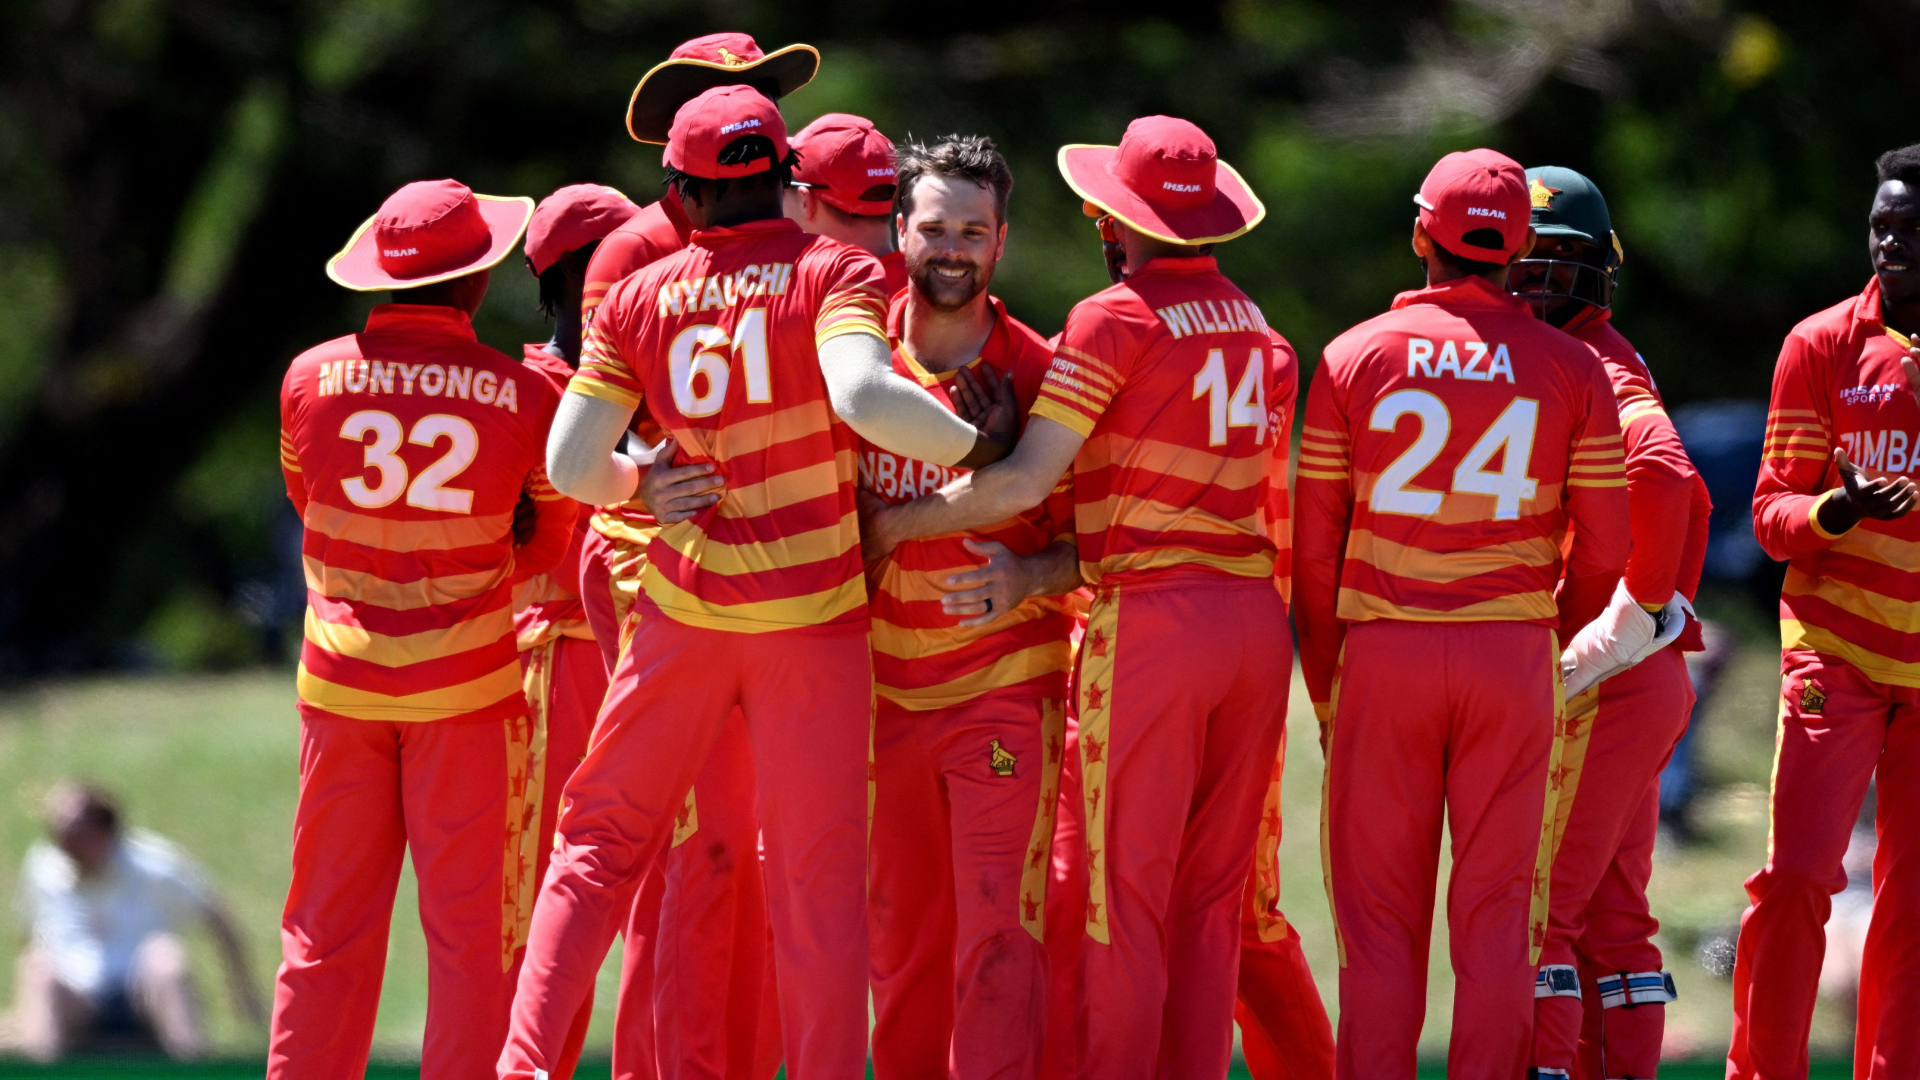 Zimbabwe beat the Australians at home for the first time ever